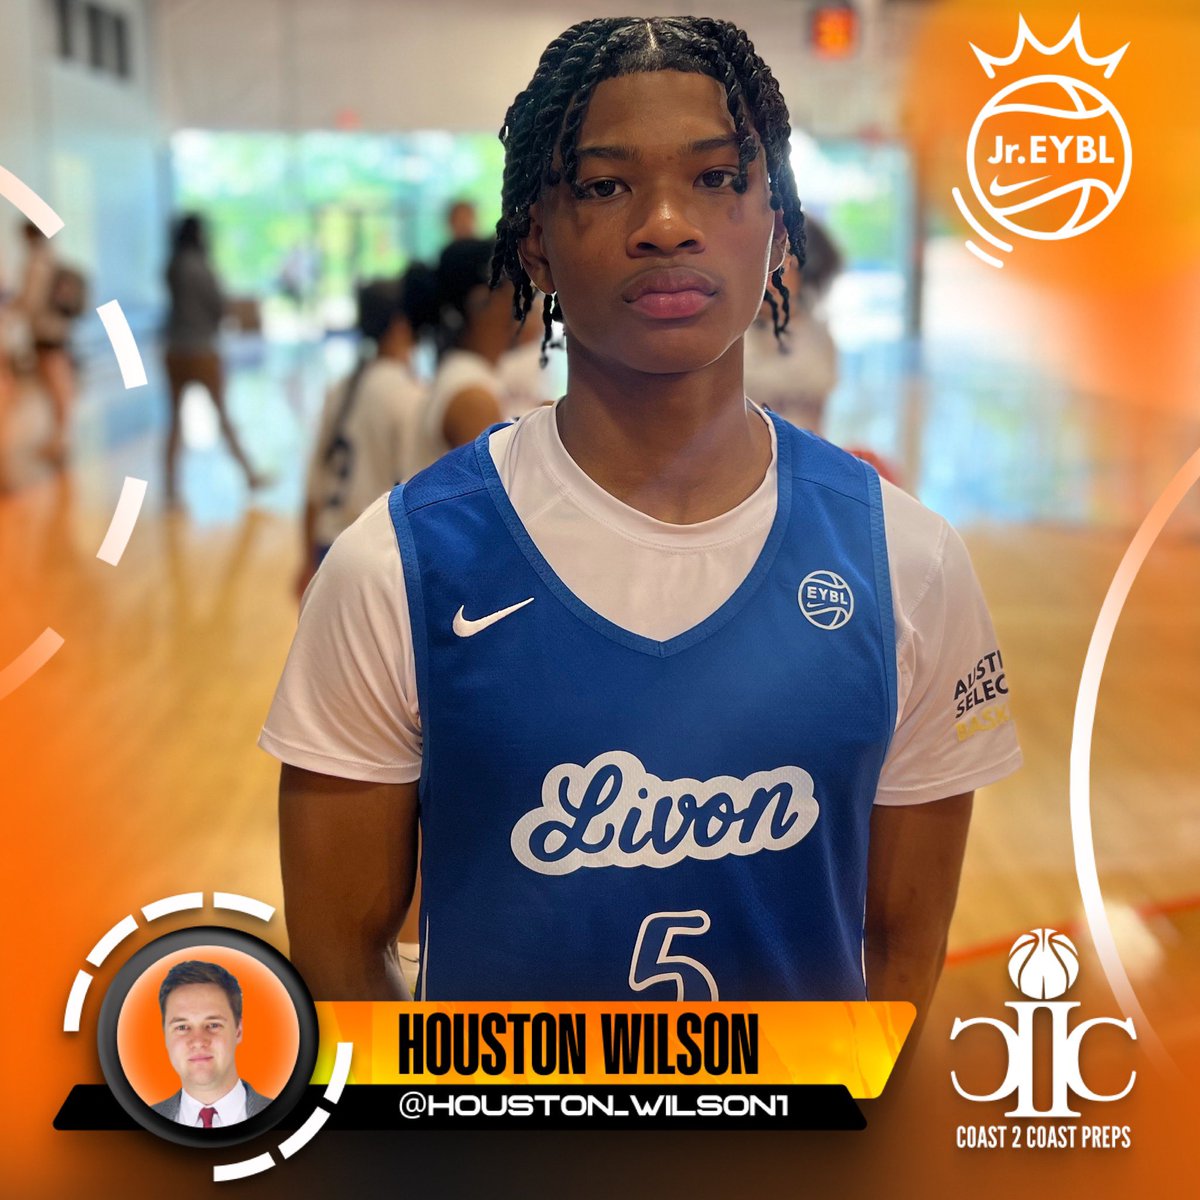 Heaven Chea continued his great Spring this morning for LivOn Select at the @NikeEYB Jr. EYBL Southeast Region Session 1. Elite scorer that can get going in a hurry. Tremendous at creating his own shot. #Coast2CoastPreps @Coast2CoastPrep